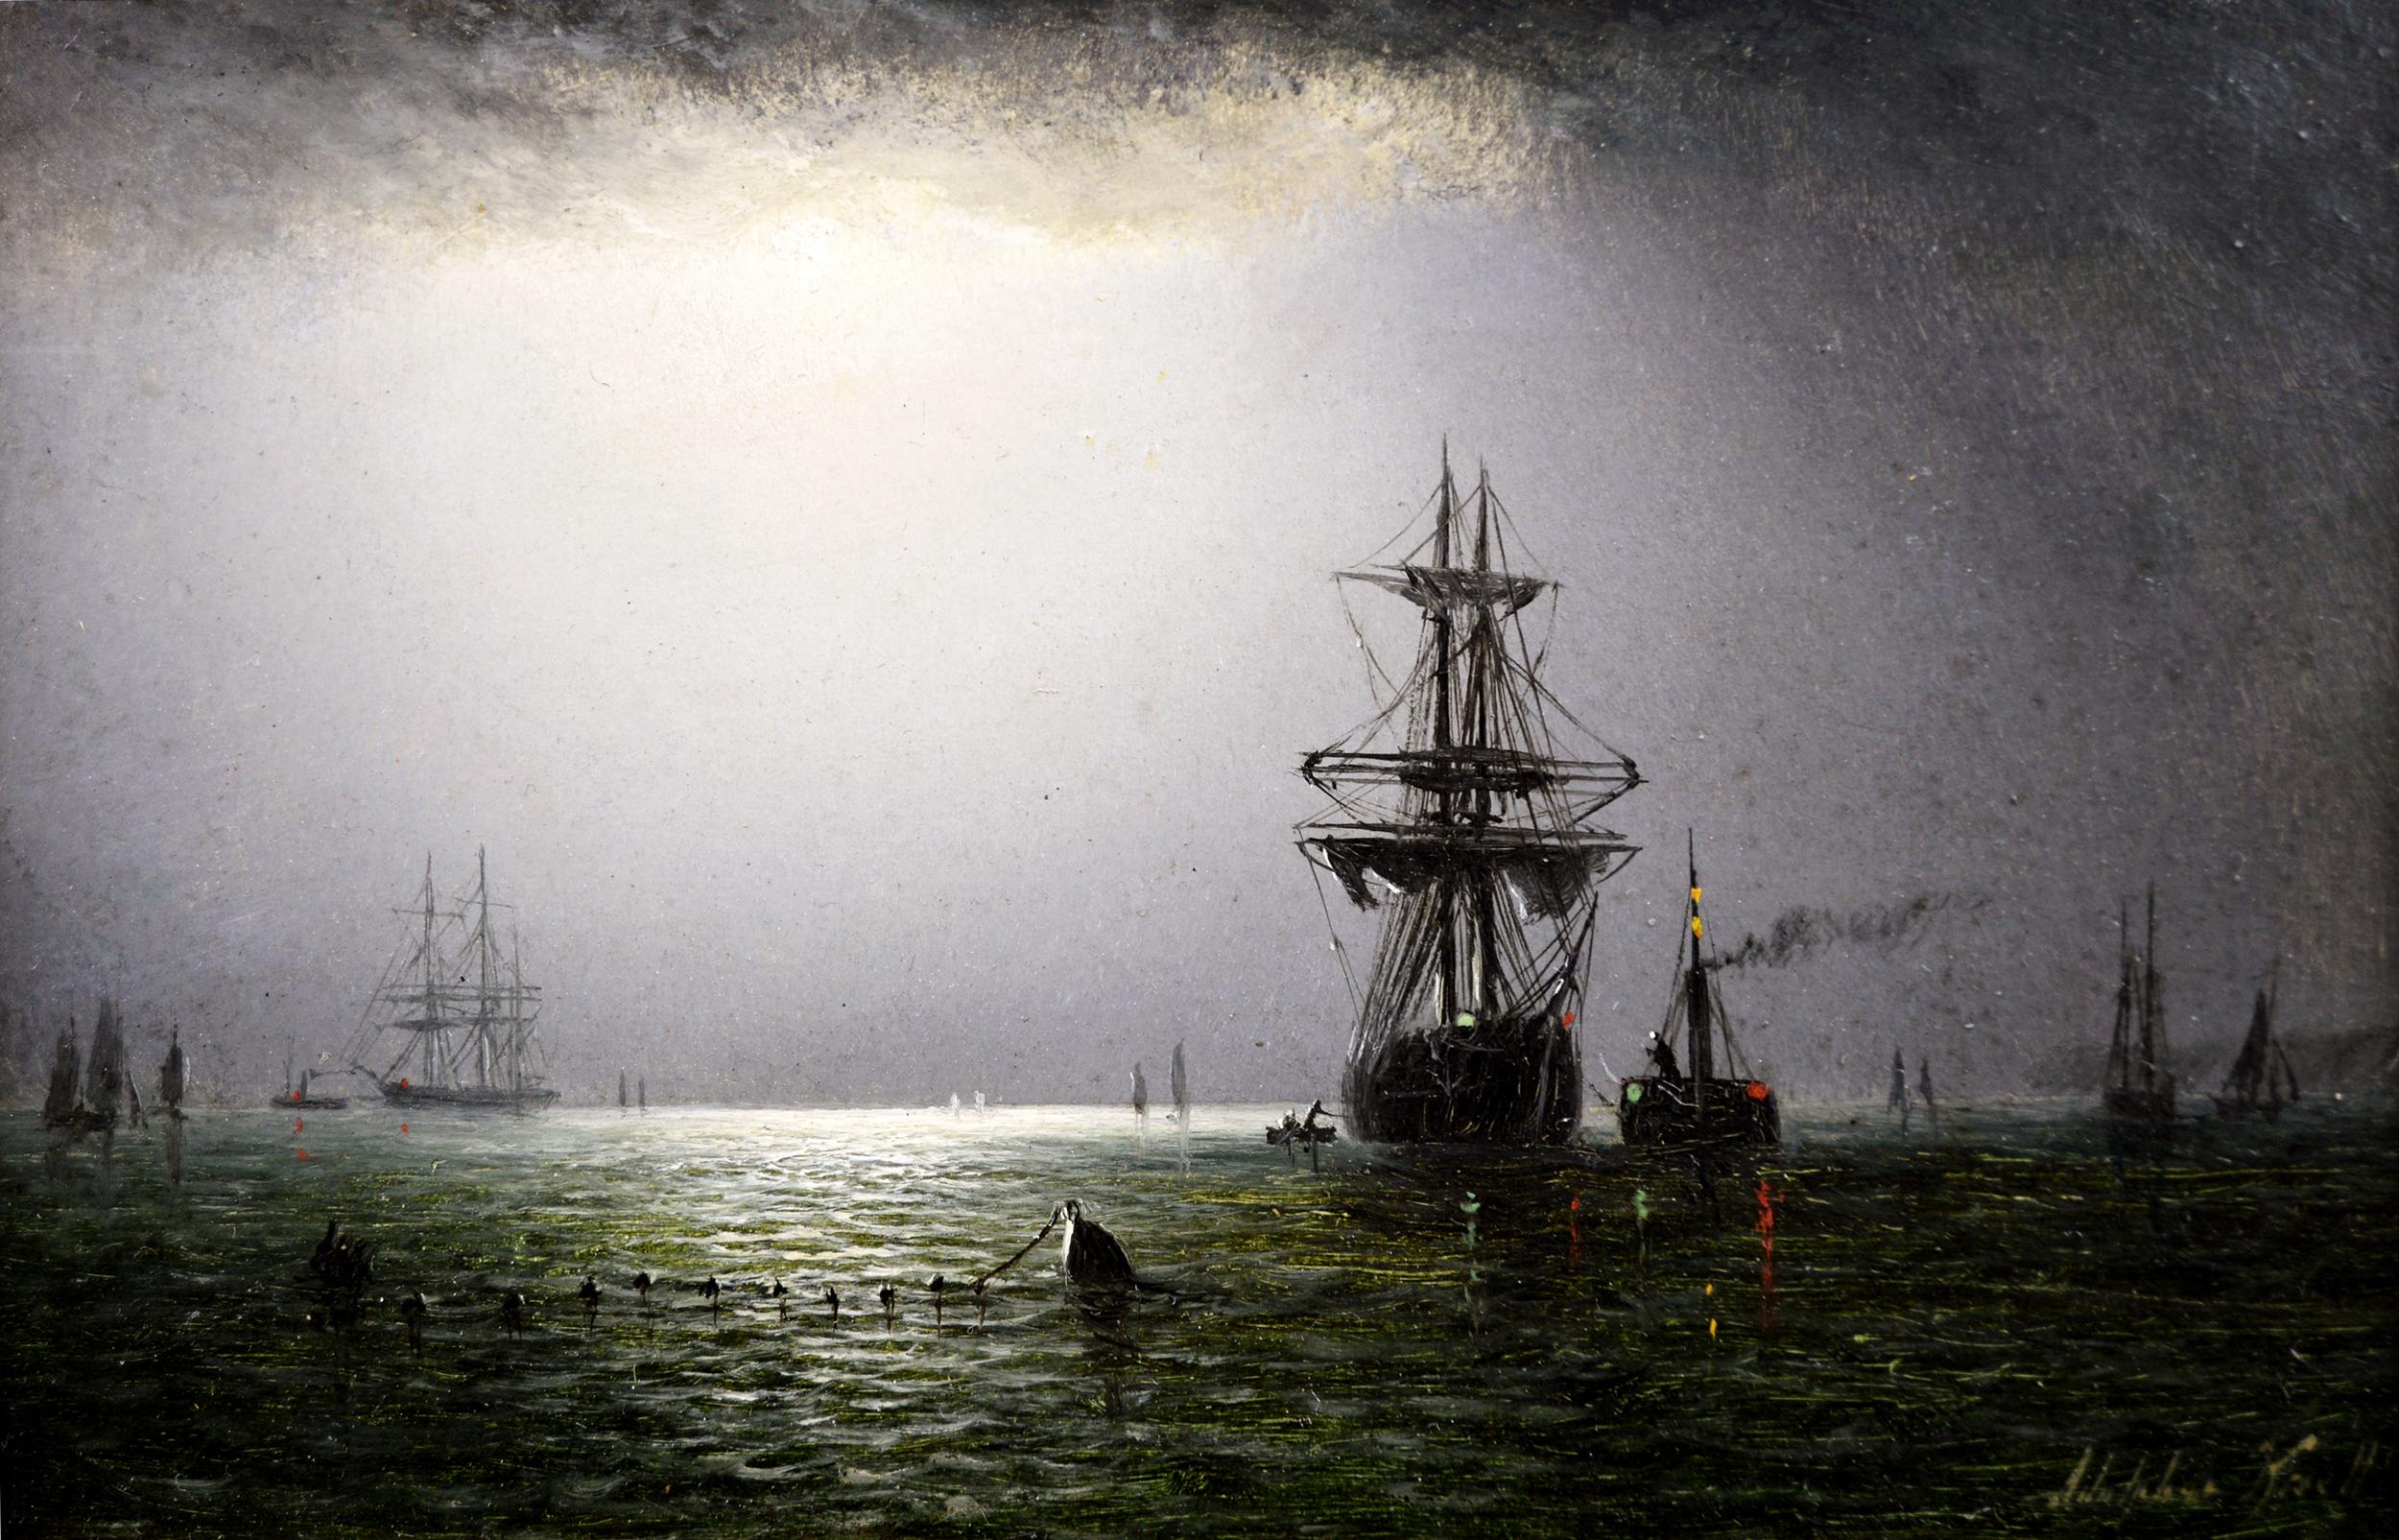 Adolphus Knell
British, (b.1849, fl.1870-1890)
Shipping by Moonlight & Shipping Early Morning
Oil on board, pair, both signed
Image size: 5.75 inches x 8.75 inches 
Size including frame: 9.25 inches x 12.25 inches

Adolphus Knell was born on 22